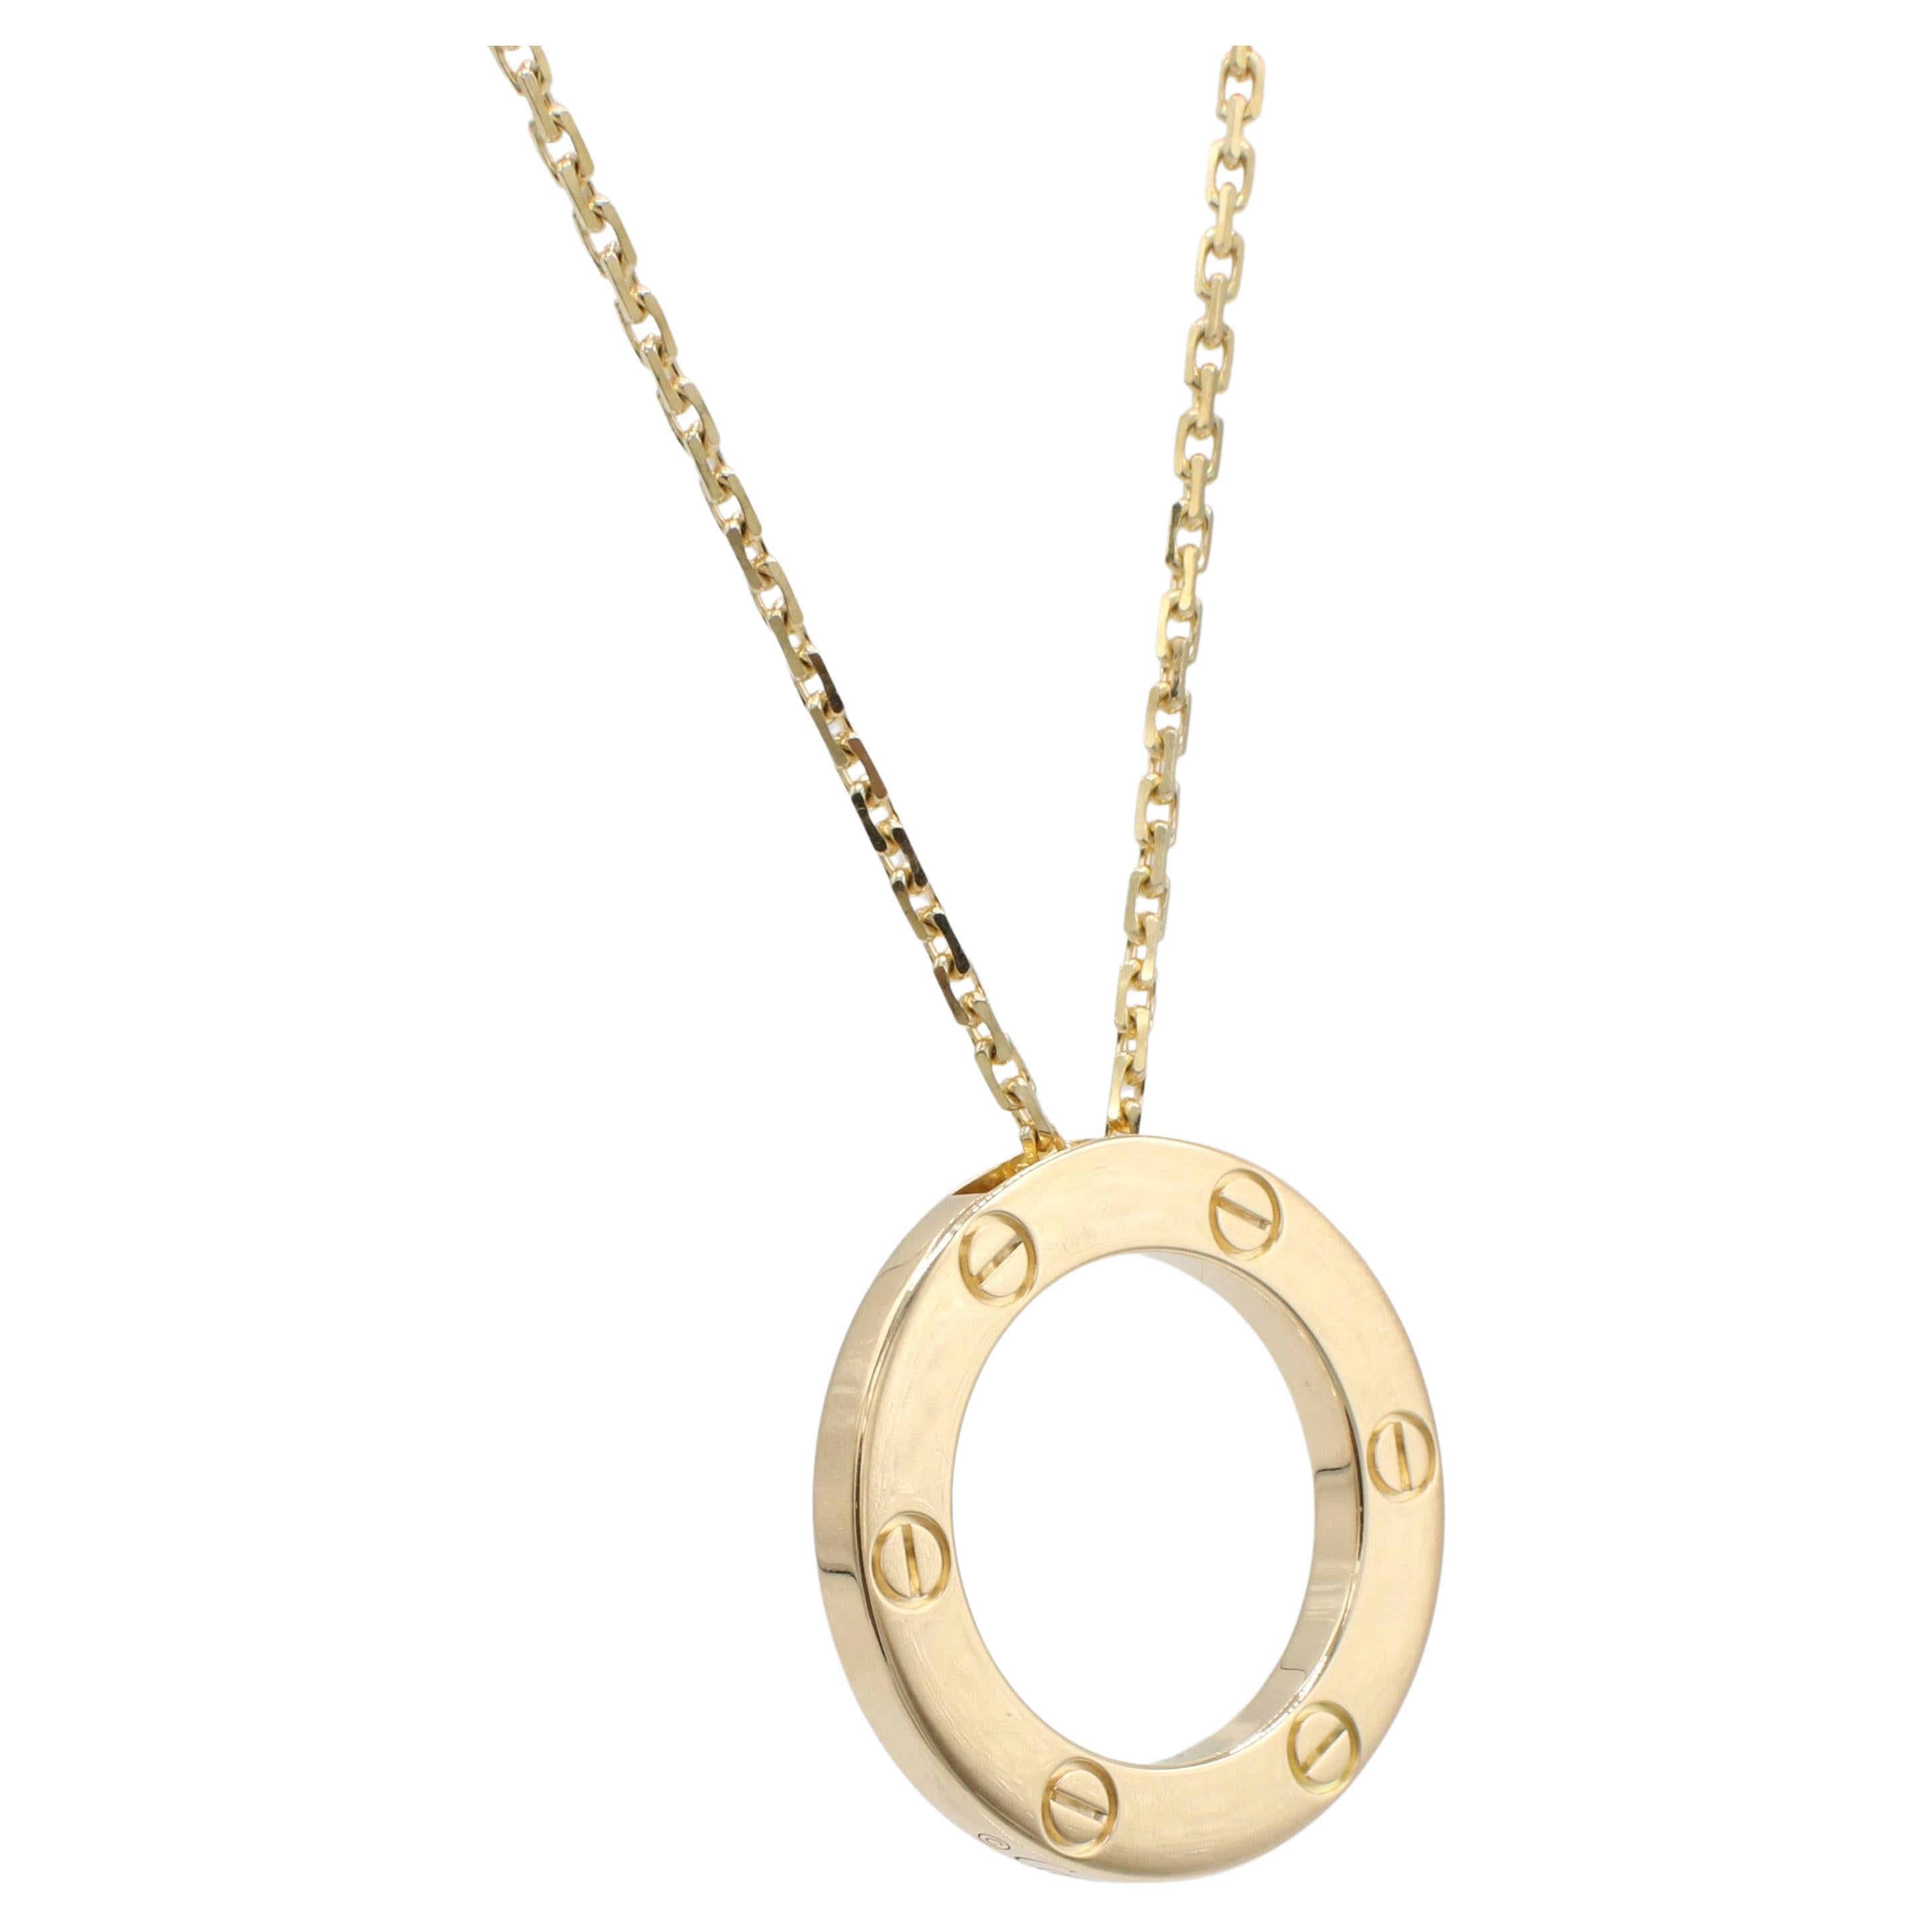 Cartier Love 18 Karat Yellow Gold Pendant Drop Necklace Box & Papers
Metal: 18k yellow gold
Weight: 13.17 grams
Chain: 16.5 inches
Inner Diameter: 16mm
Retail: $3,850 USD
Note: Box, papers, receipt 